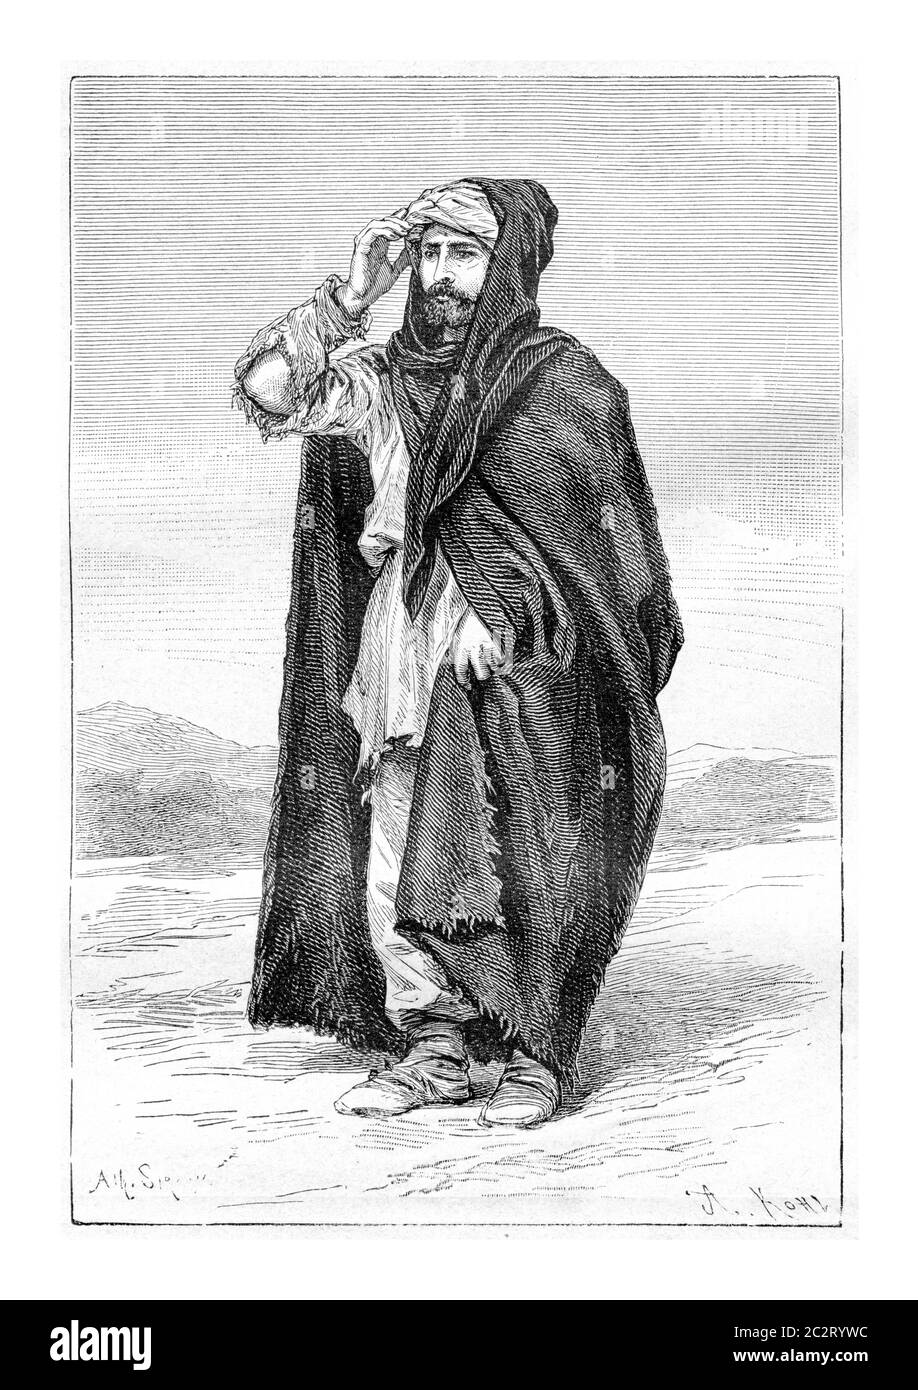 Peasant Mine Aristocrat from Svaneti, Georgia, drawing by Sirouy based on a photograph by Ermakoft, vintage illustration. Le Tour du Monde, Travel Jou Stock Photo